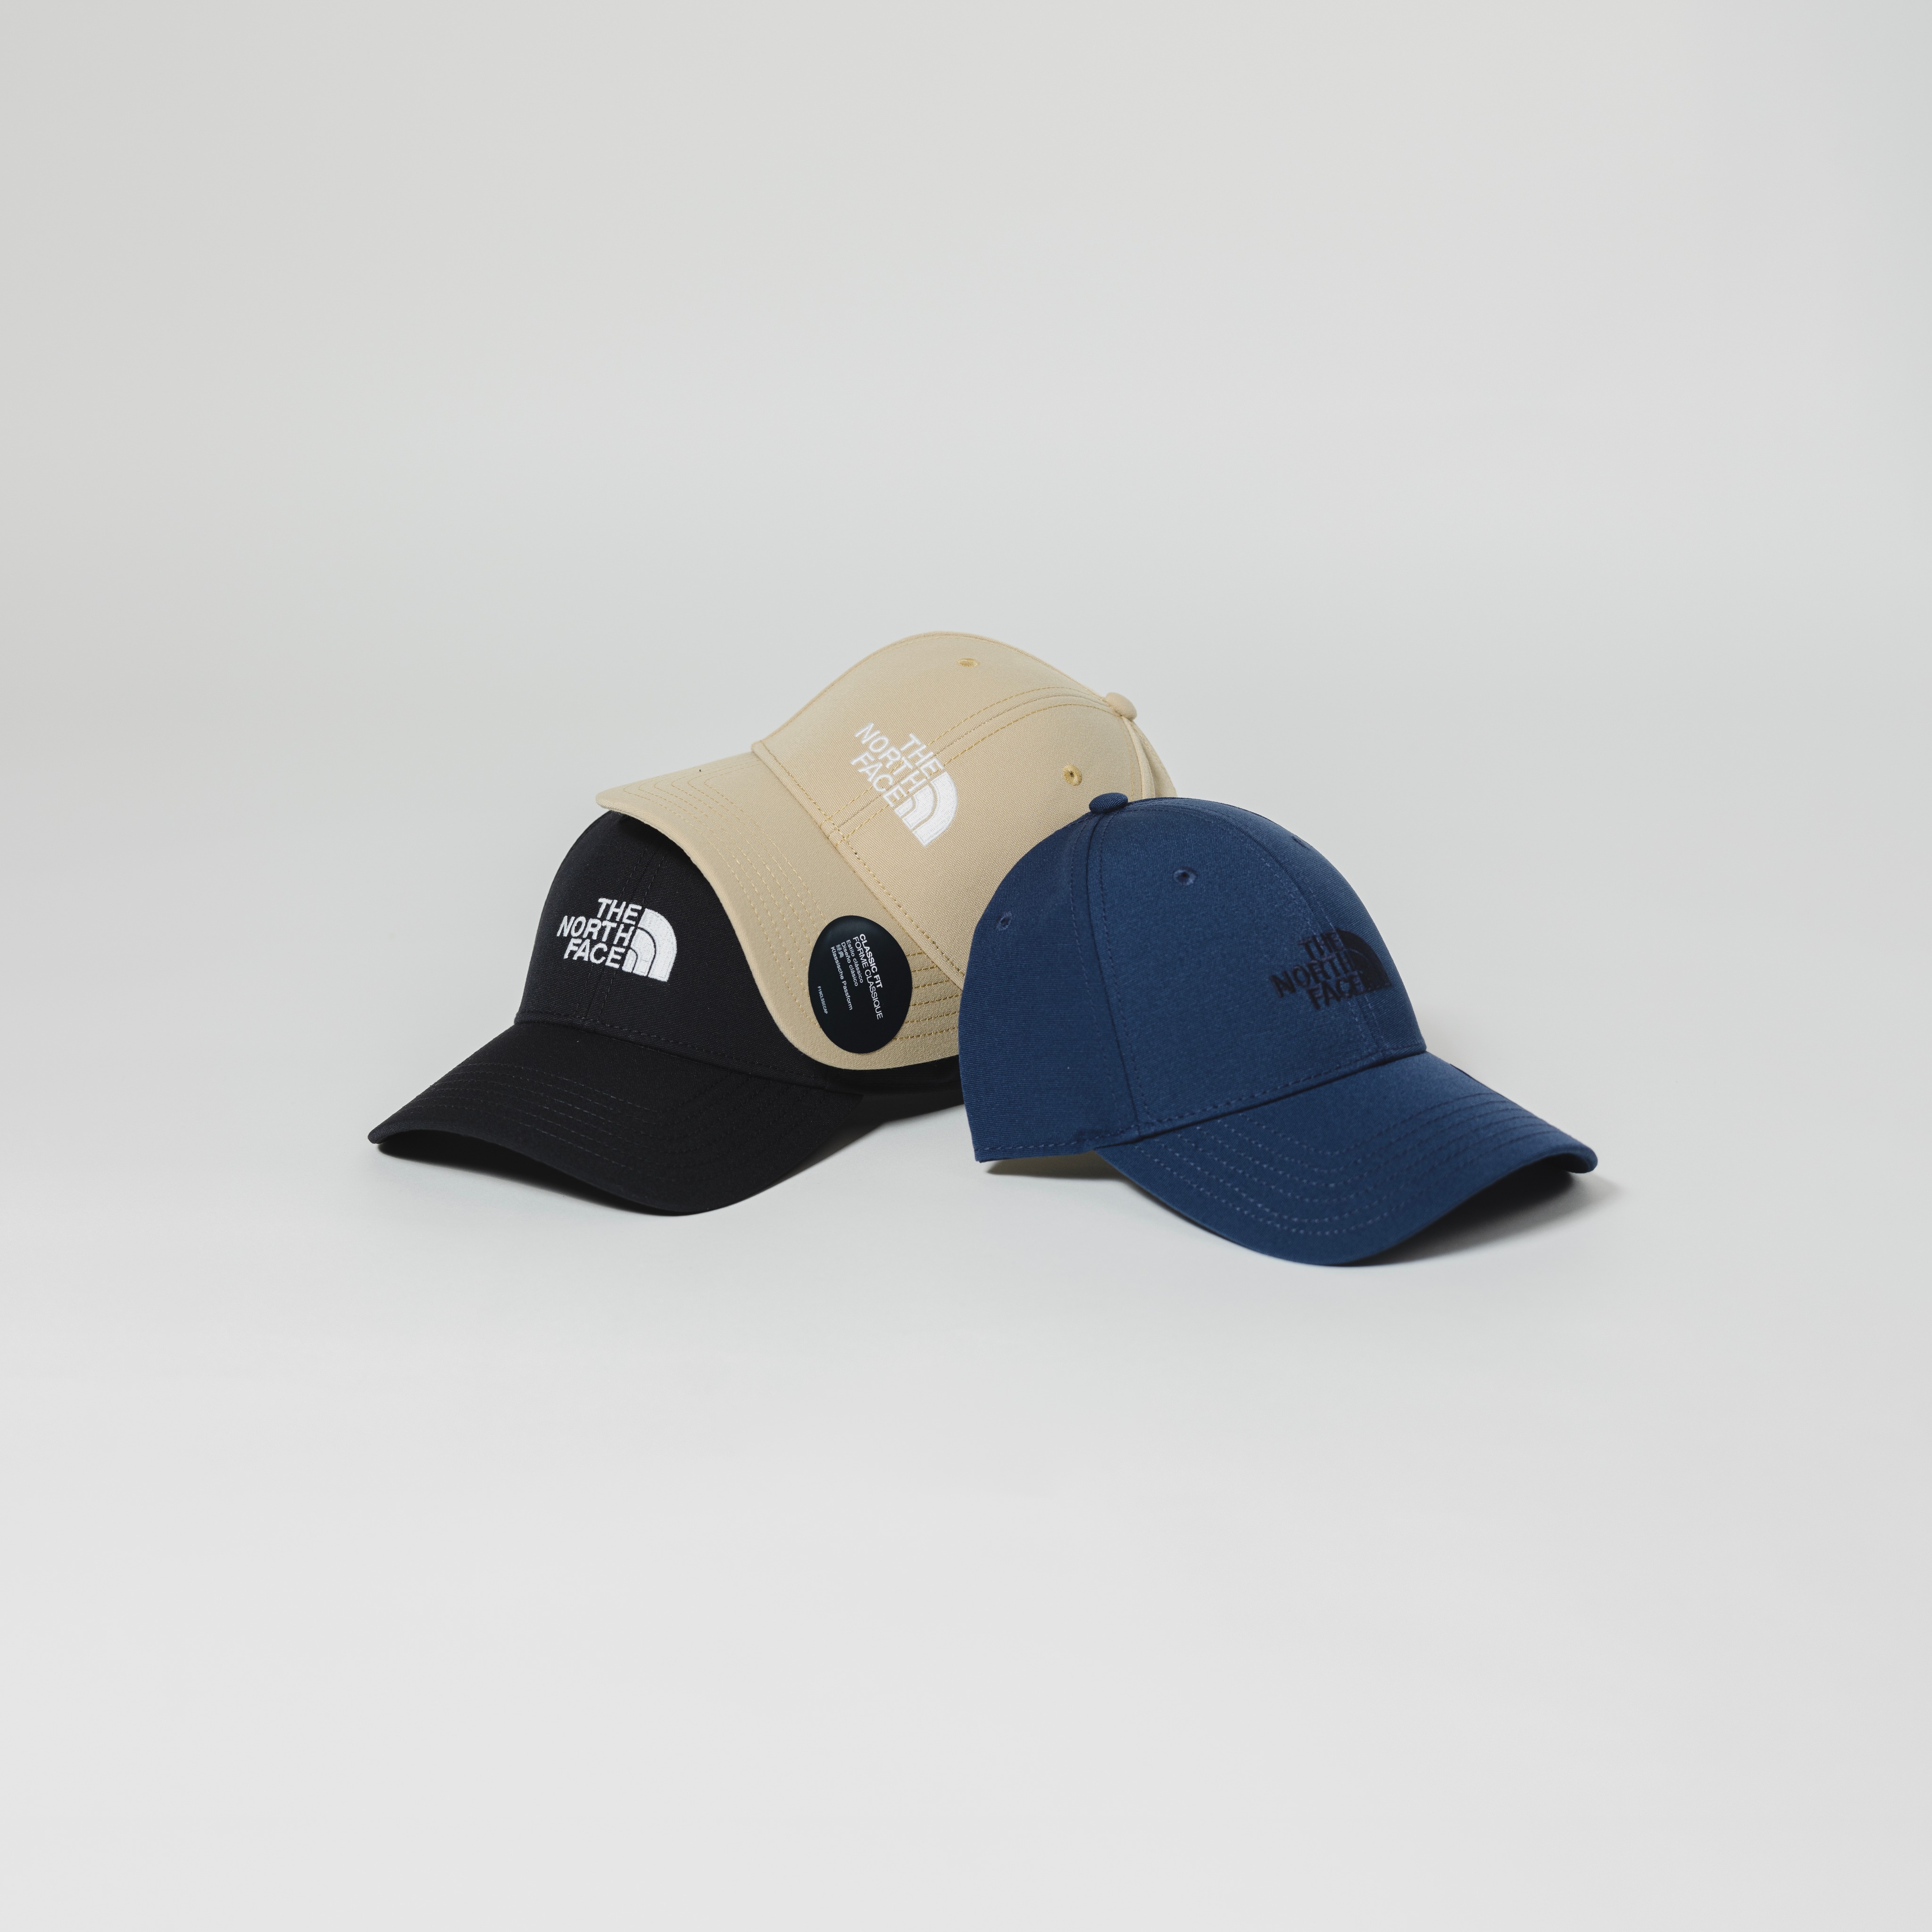 THE NORTH FACE RECYCLED 66 CLASSIC HAT 刺繡LOGO 老帽棒球帽-NF